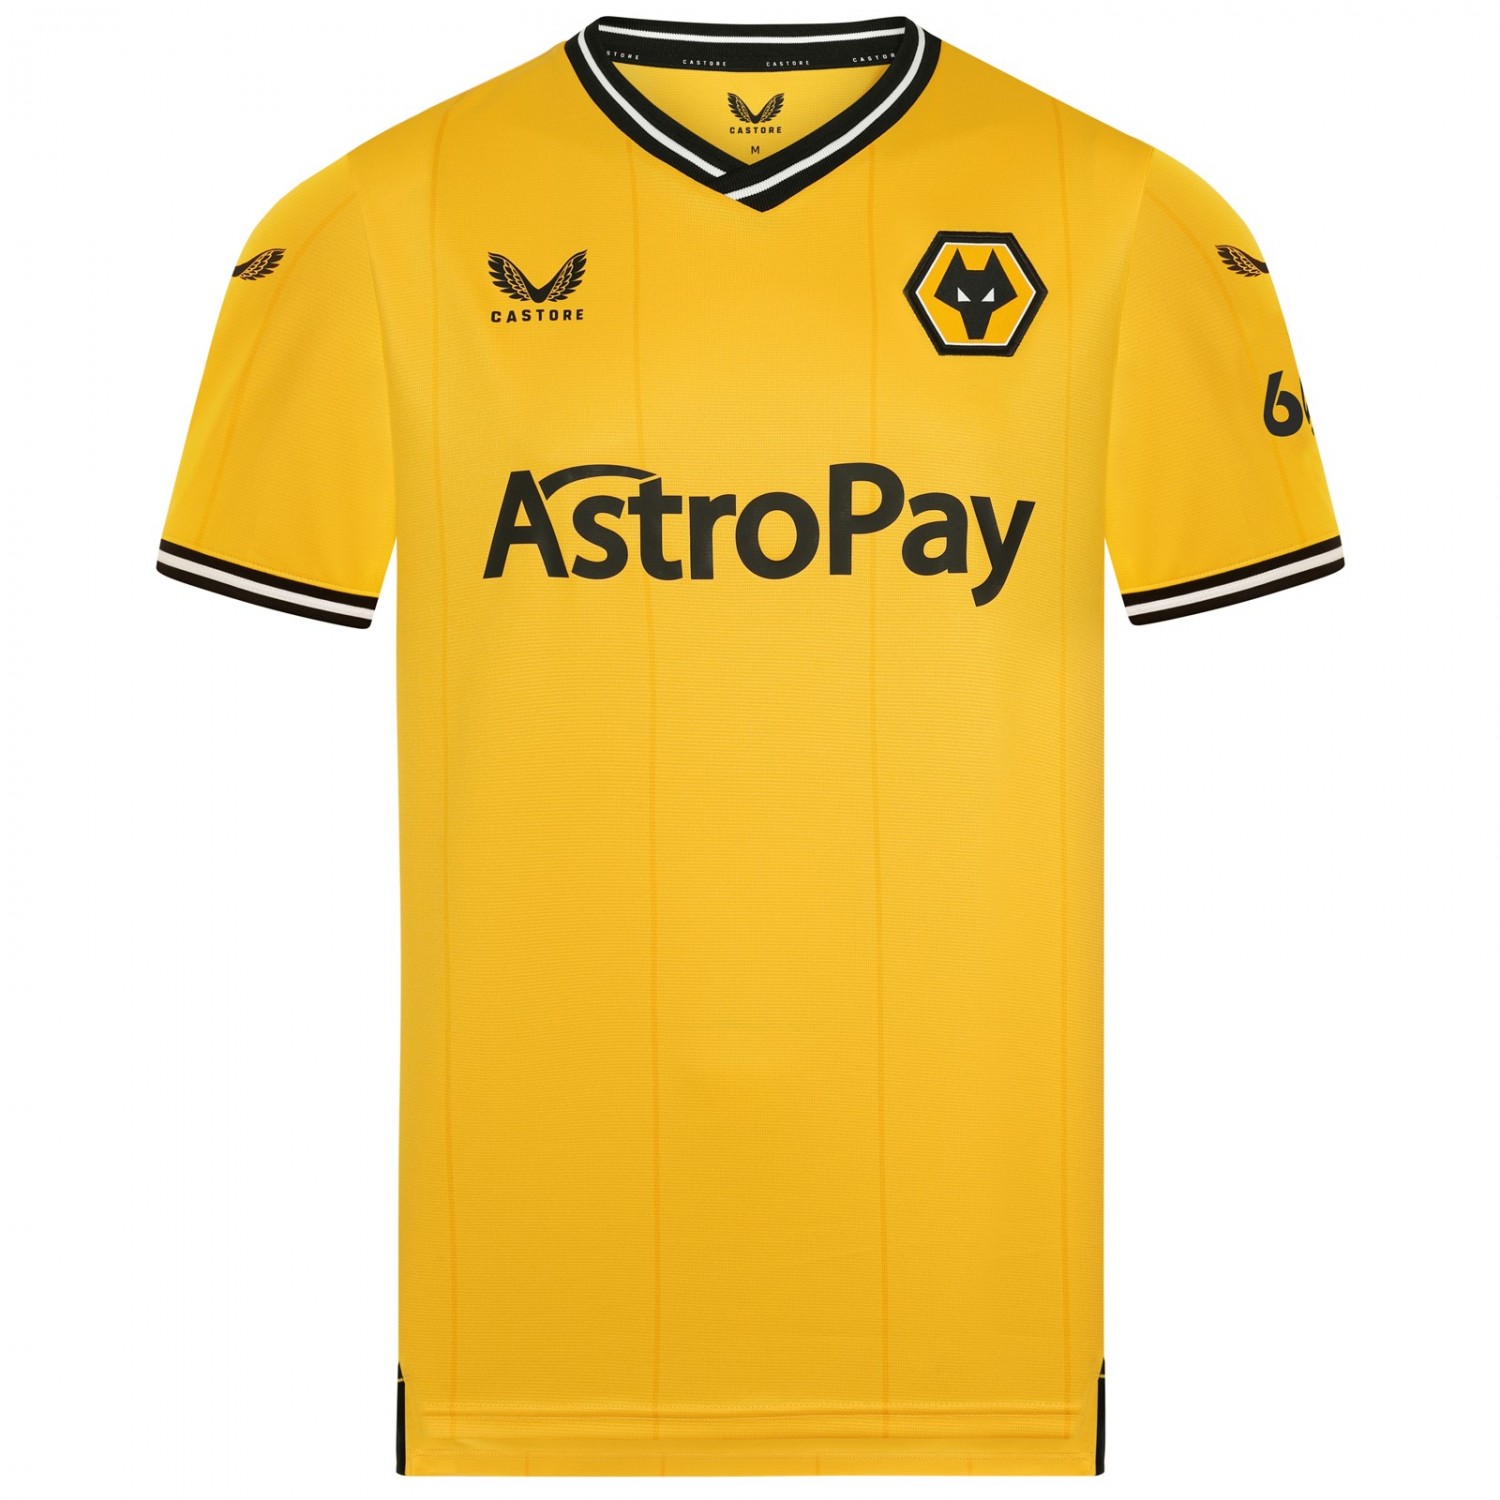 2023-24 wolves home shirt - adult
introducing the 2023-24 wolves home shirt - adult, crafted from 100% Polyester. the design for this shirt has been carefully crafted combining classic elements of the club's history with modern design features.
the shirt features a striking gold base and the iconic club crest proudly displayed on the chest partnered with a tapered collar and cuffs in a sleek and modern design.
Perfect for match days or casual everyday wear, this shirt is a must-have for any wolves fan.